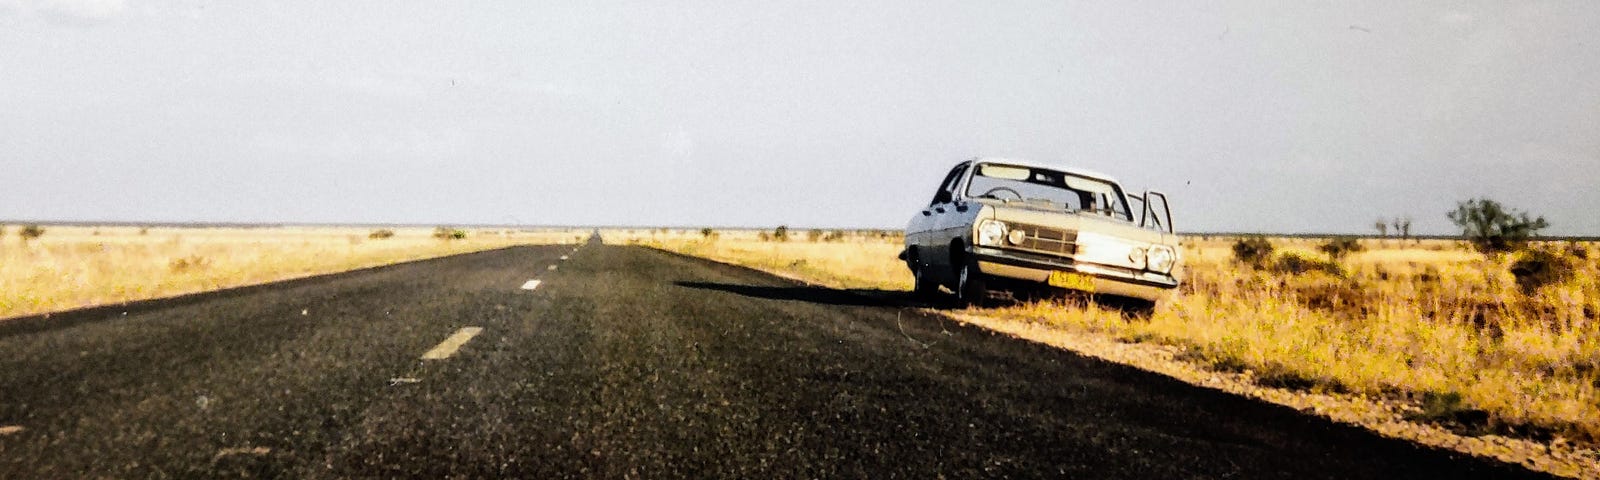 An old white car parked on the side of a desert highway in Australia, against a backdrop of blue sky and rough yellow scrubland.